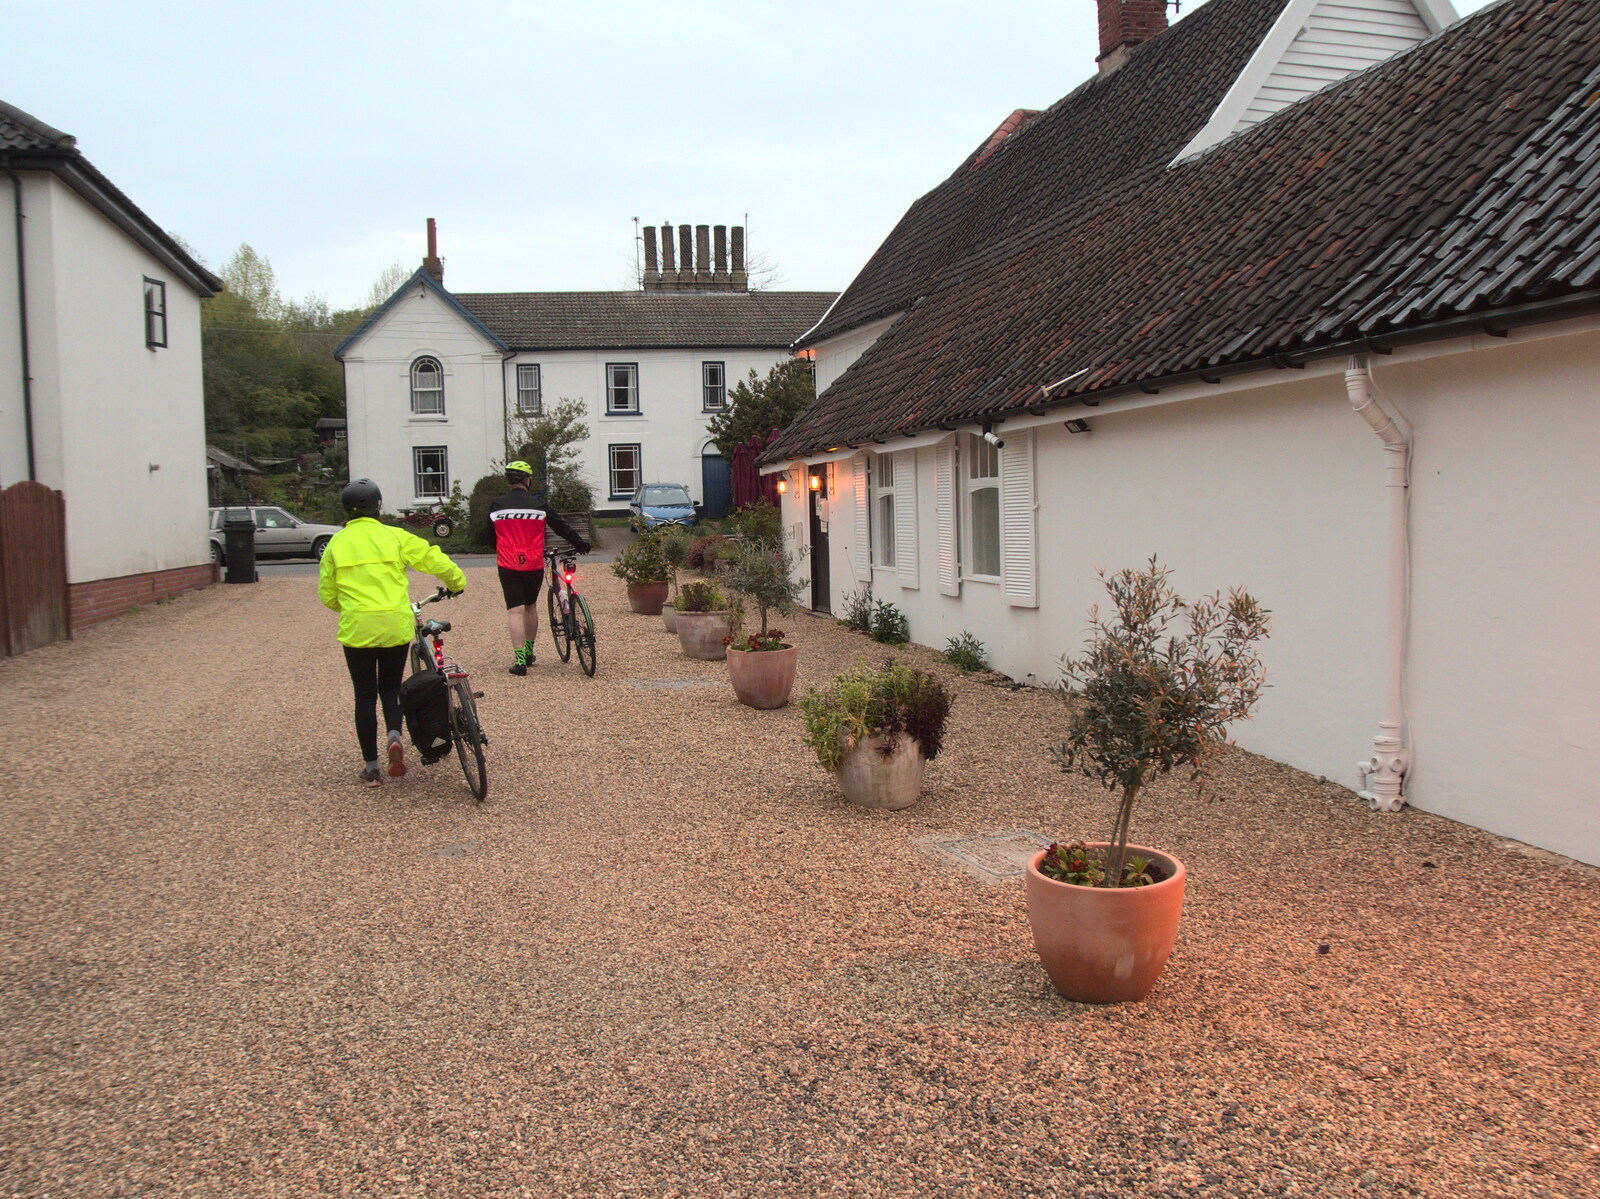 The King's Head's gravel drive from The BSCC at the King's Head, Brockdish, Norfolk - 13th May 2021